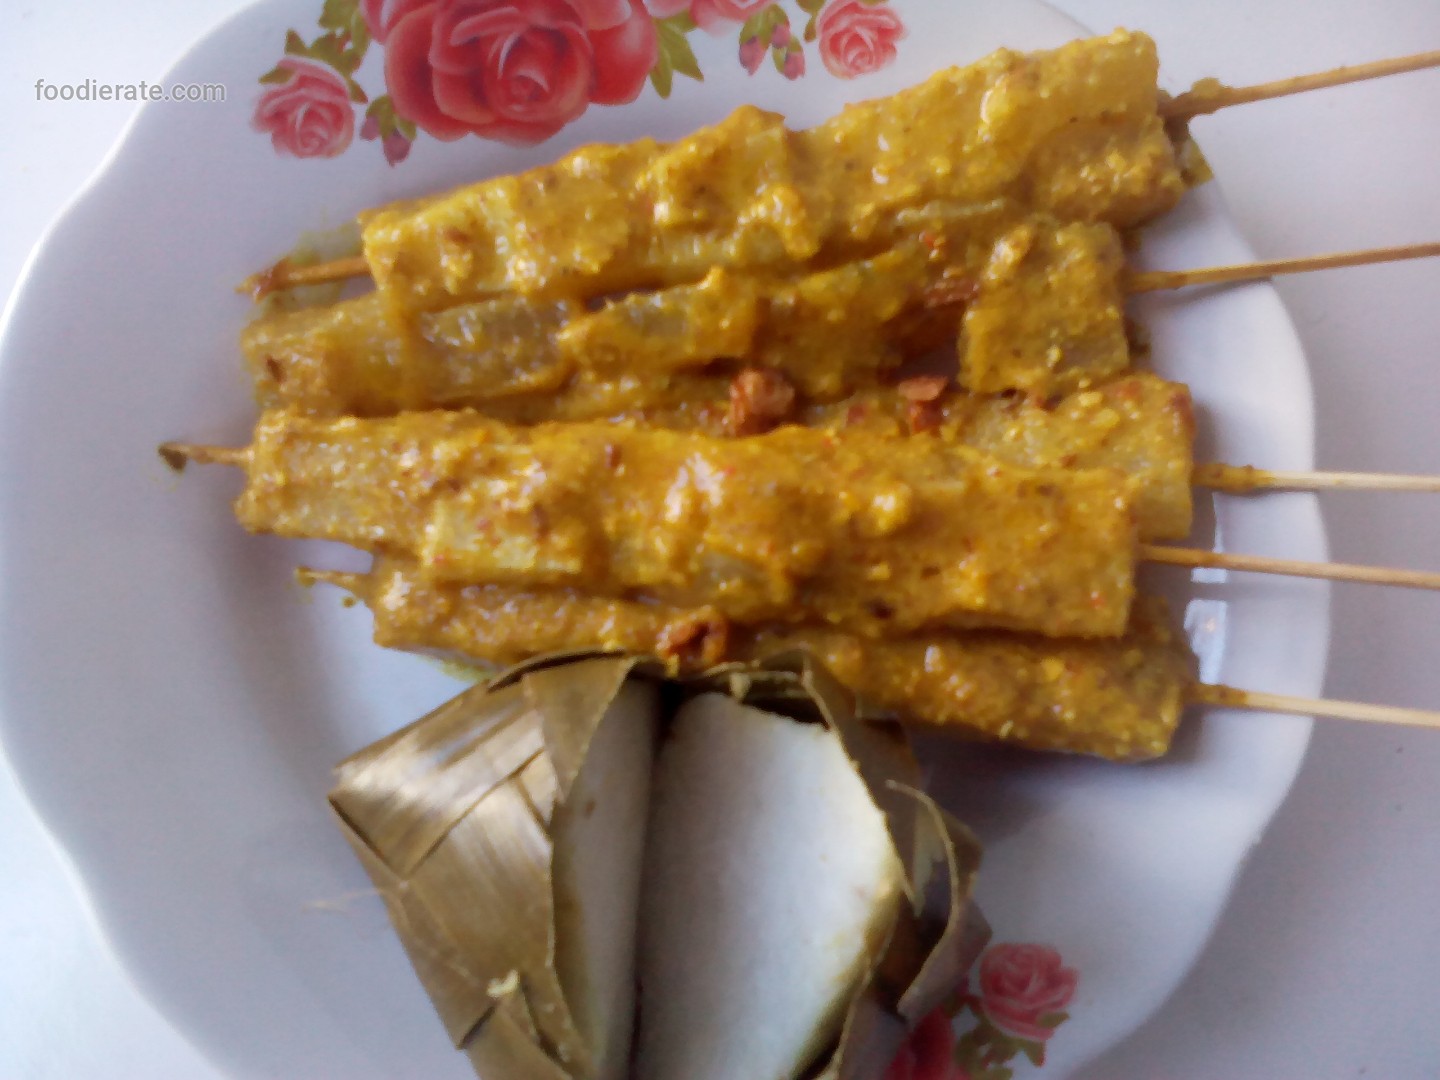 Sate cungkring